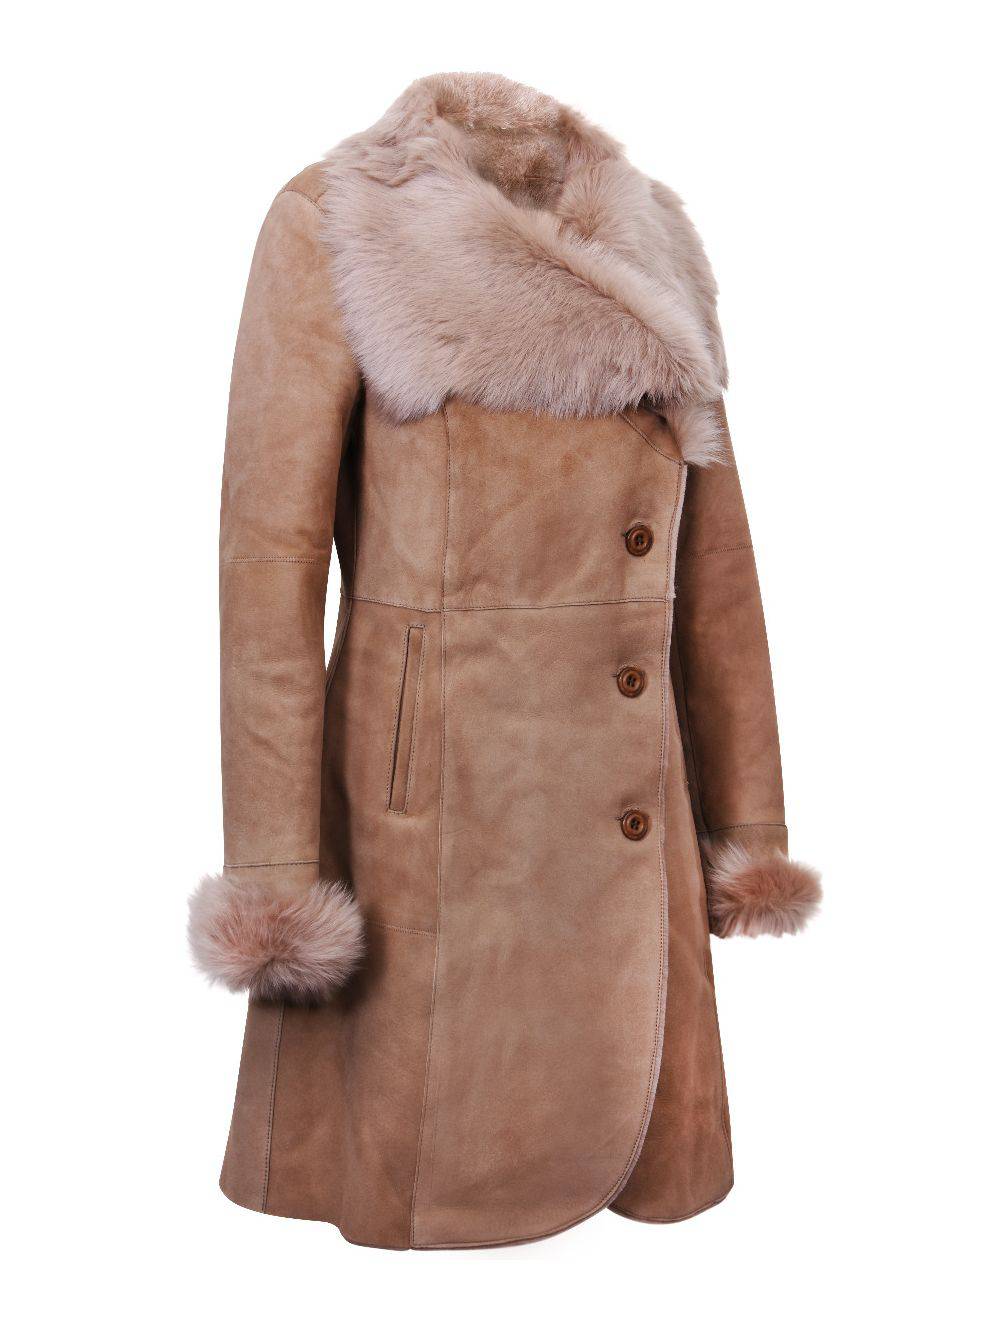 Ladies Caramel Suede Merino Shearling Sheepskin Coat with Toscana Collar for sale - Woodcock and Cavendish